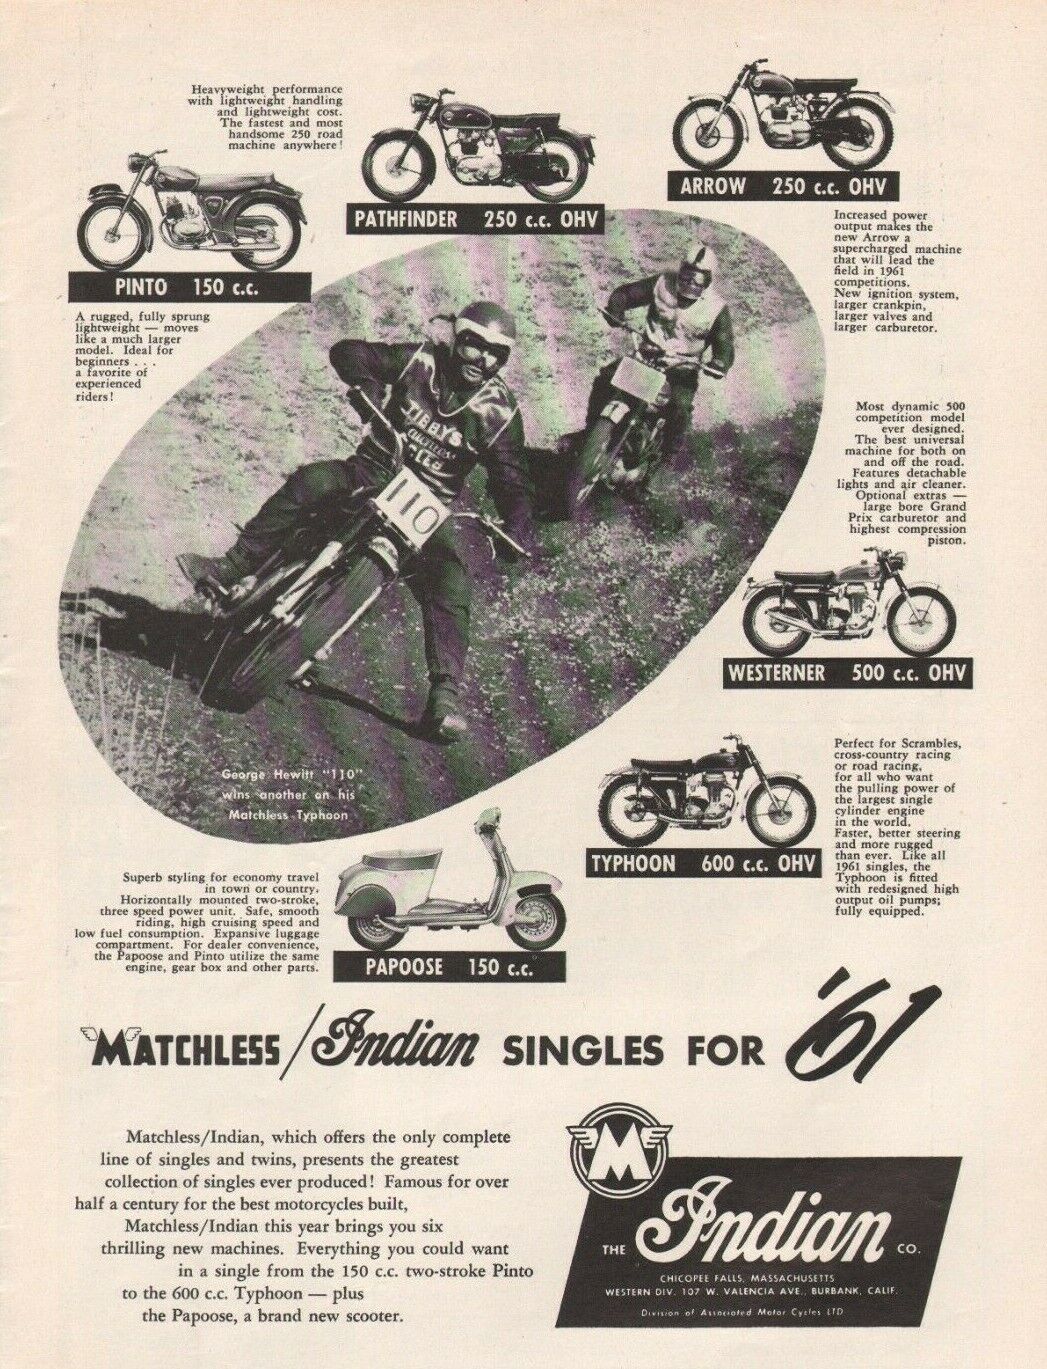 1961 George Hewitt Matchless Typhoon Indian Papoose - Vintage Motorcycle Ad